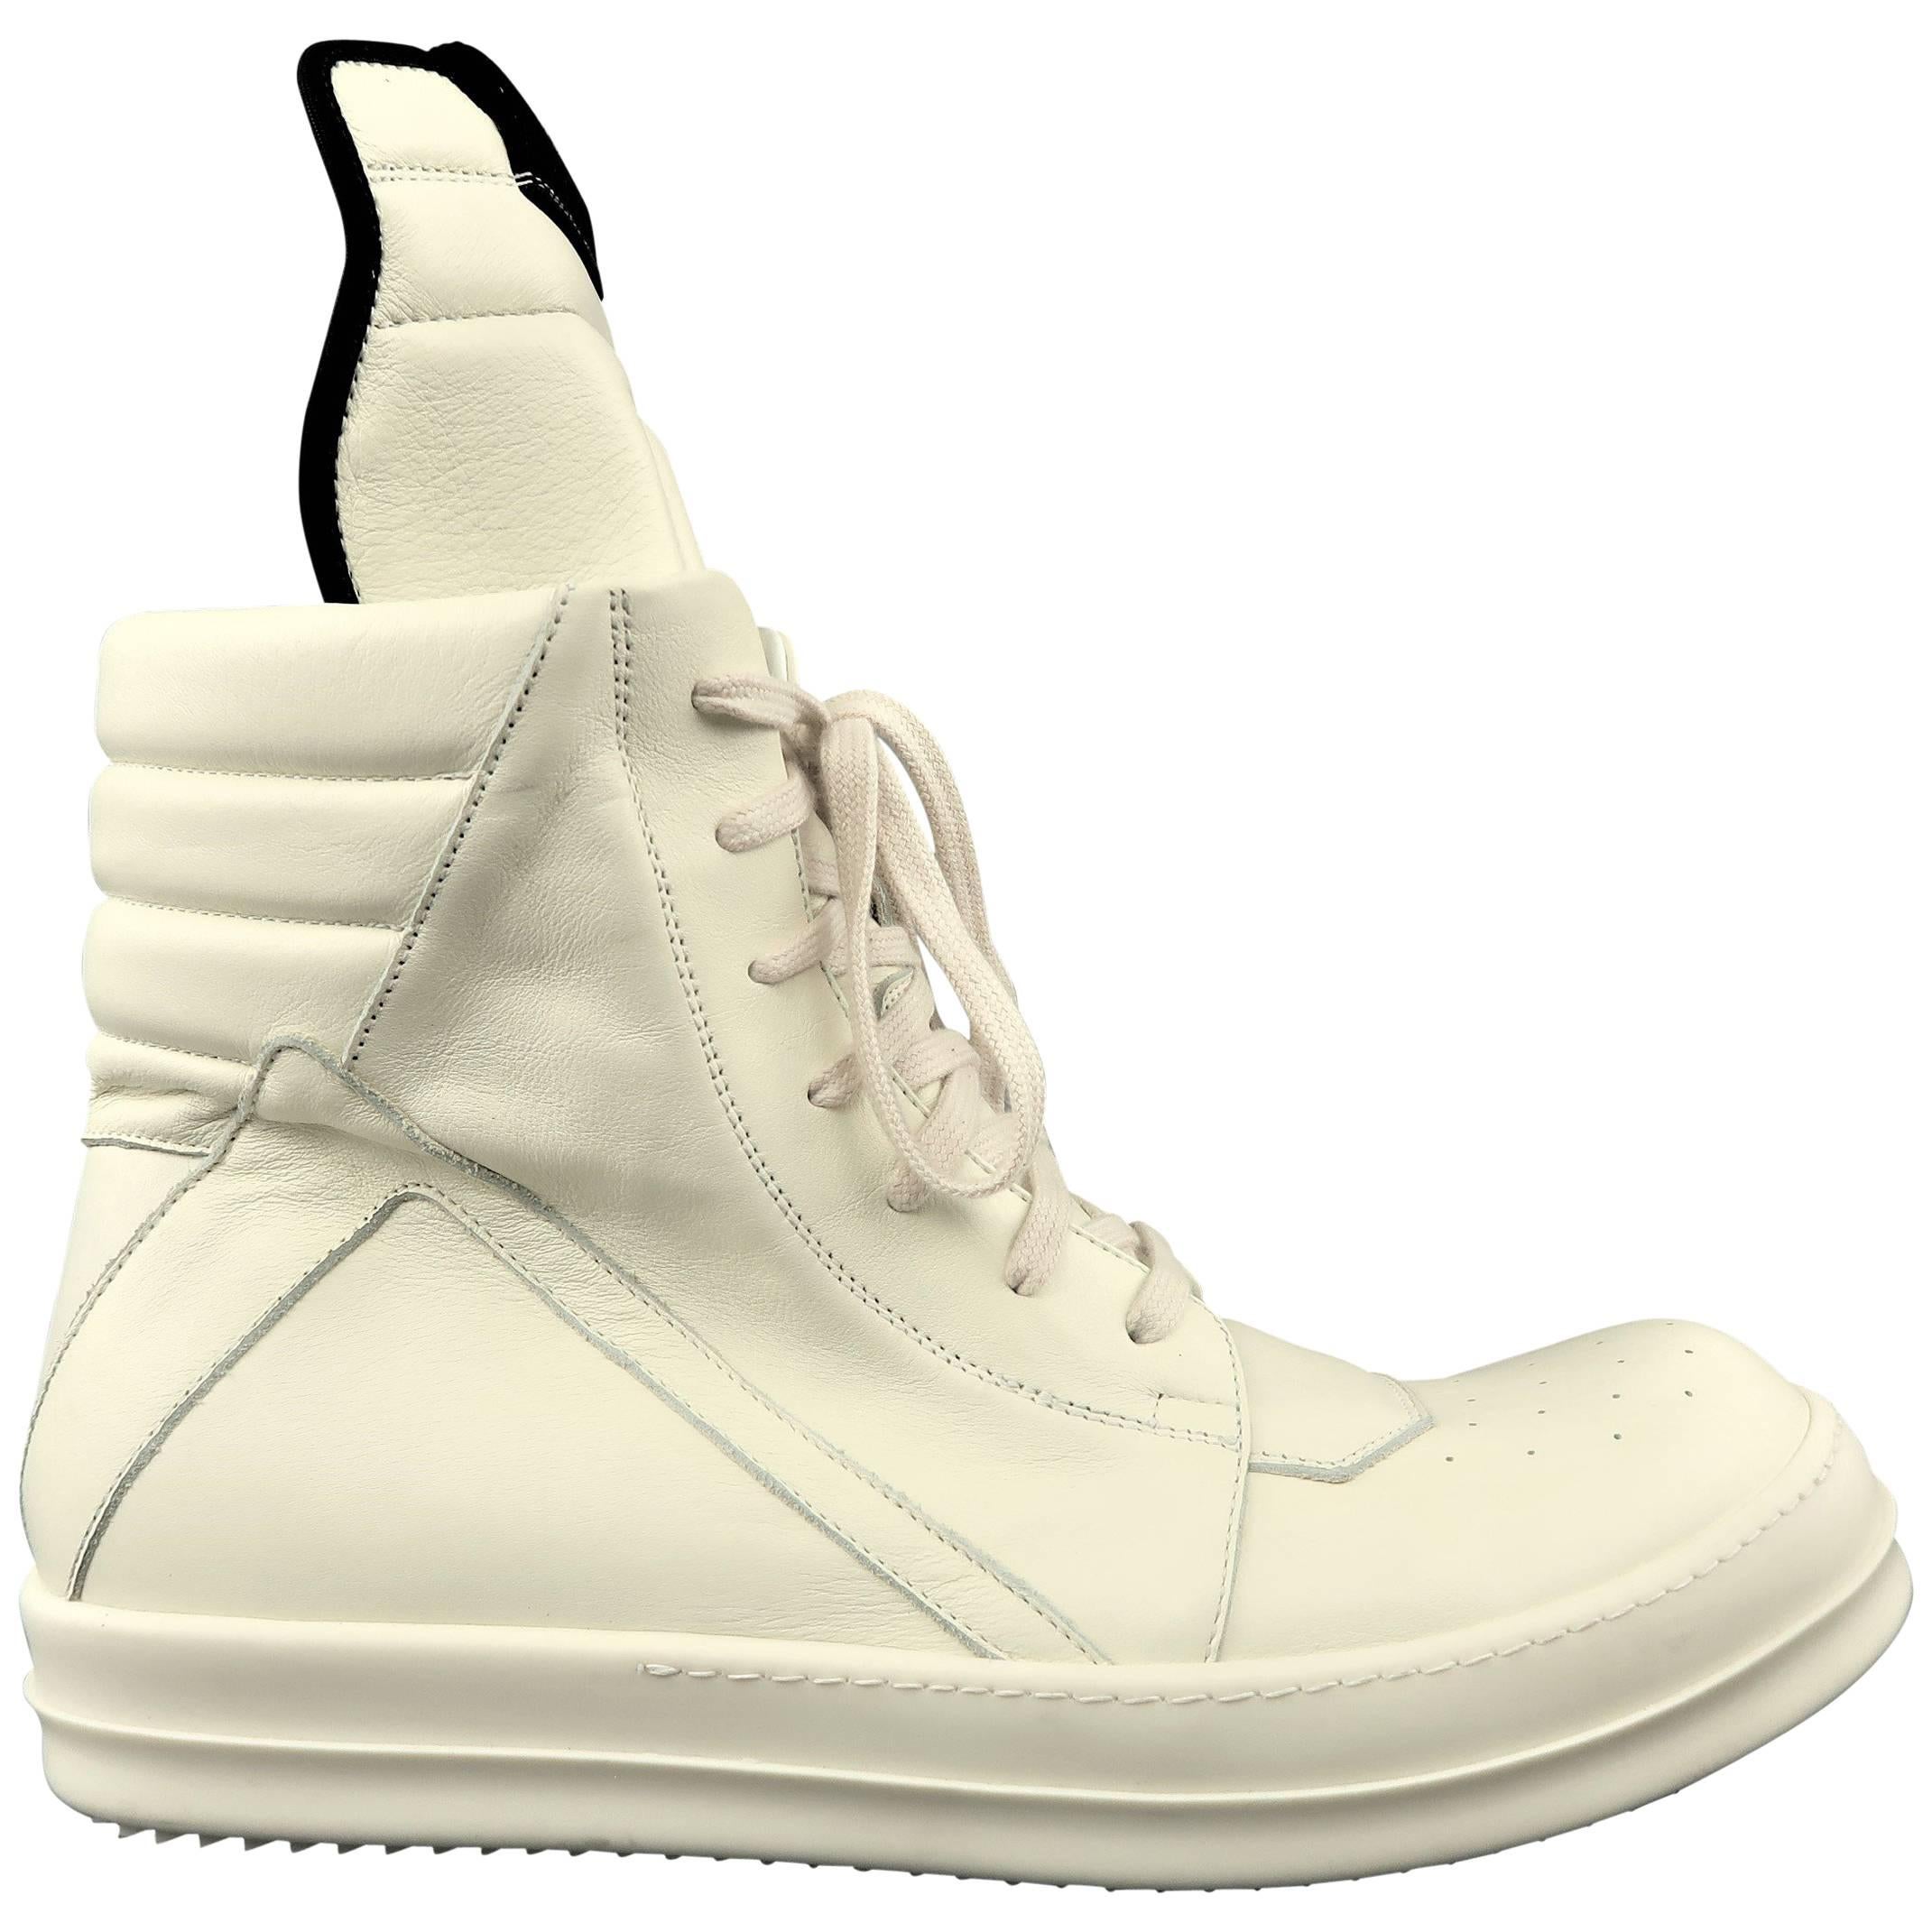 Men's RICK OWENS Size 12 Cream Leather 'Geobasket High' High Top Sneakers